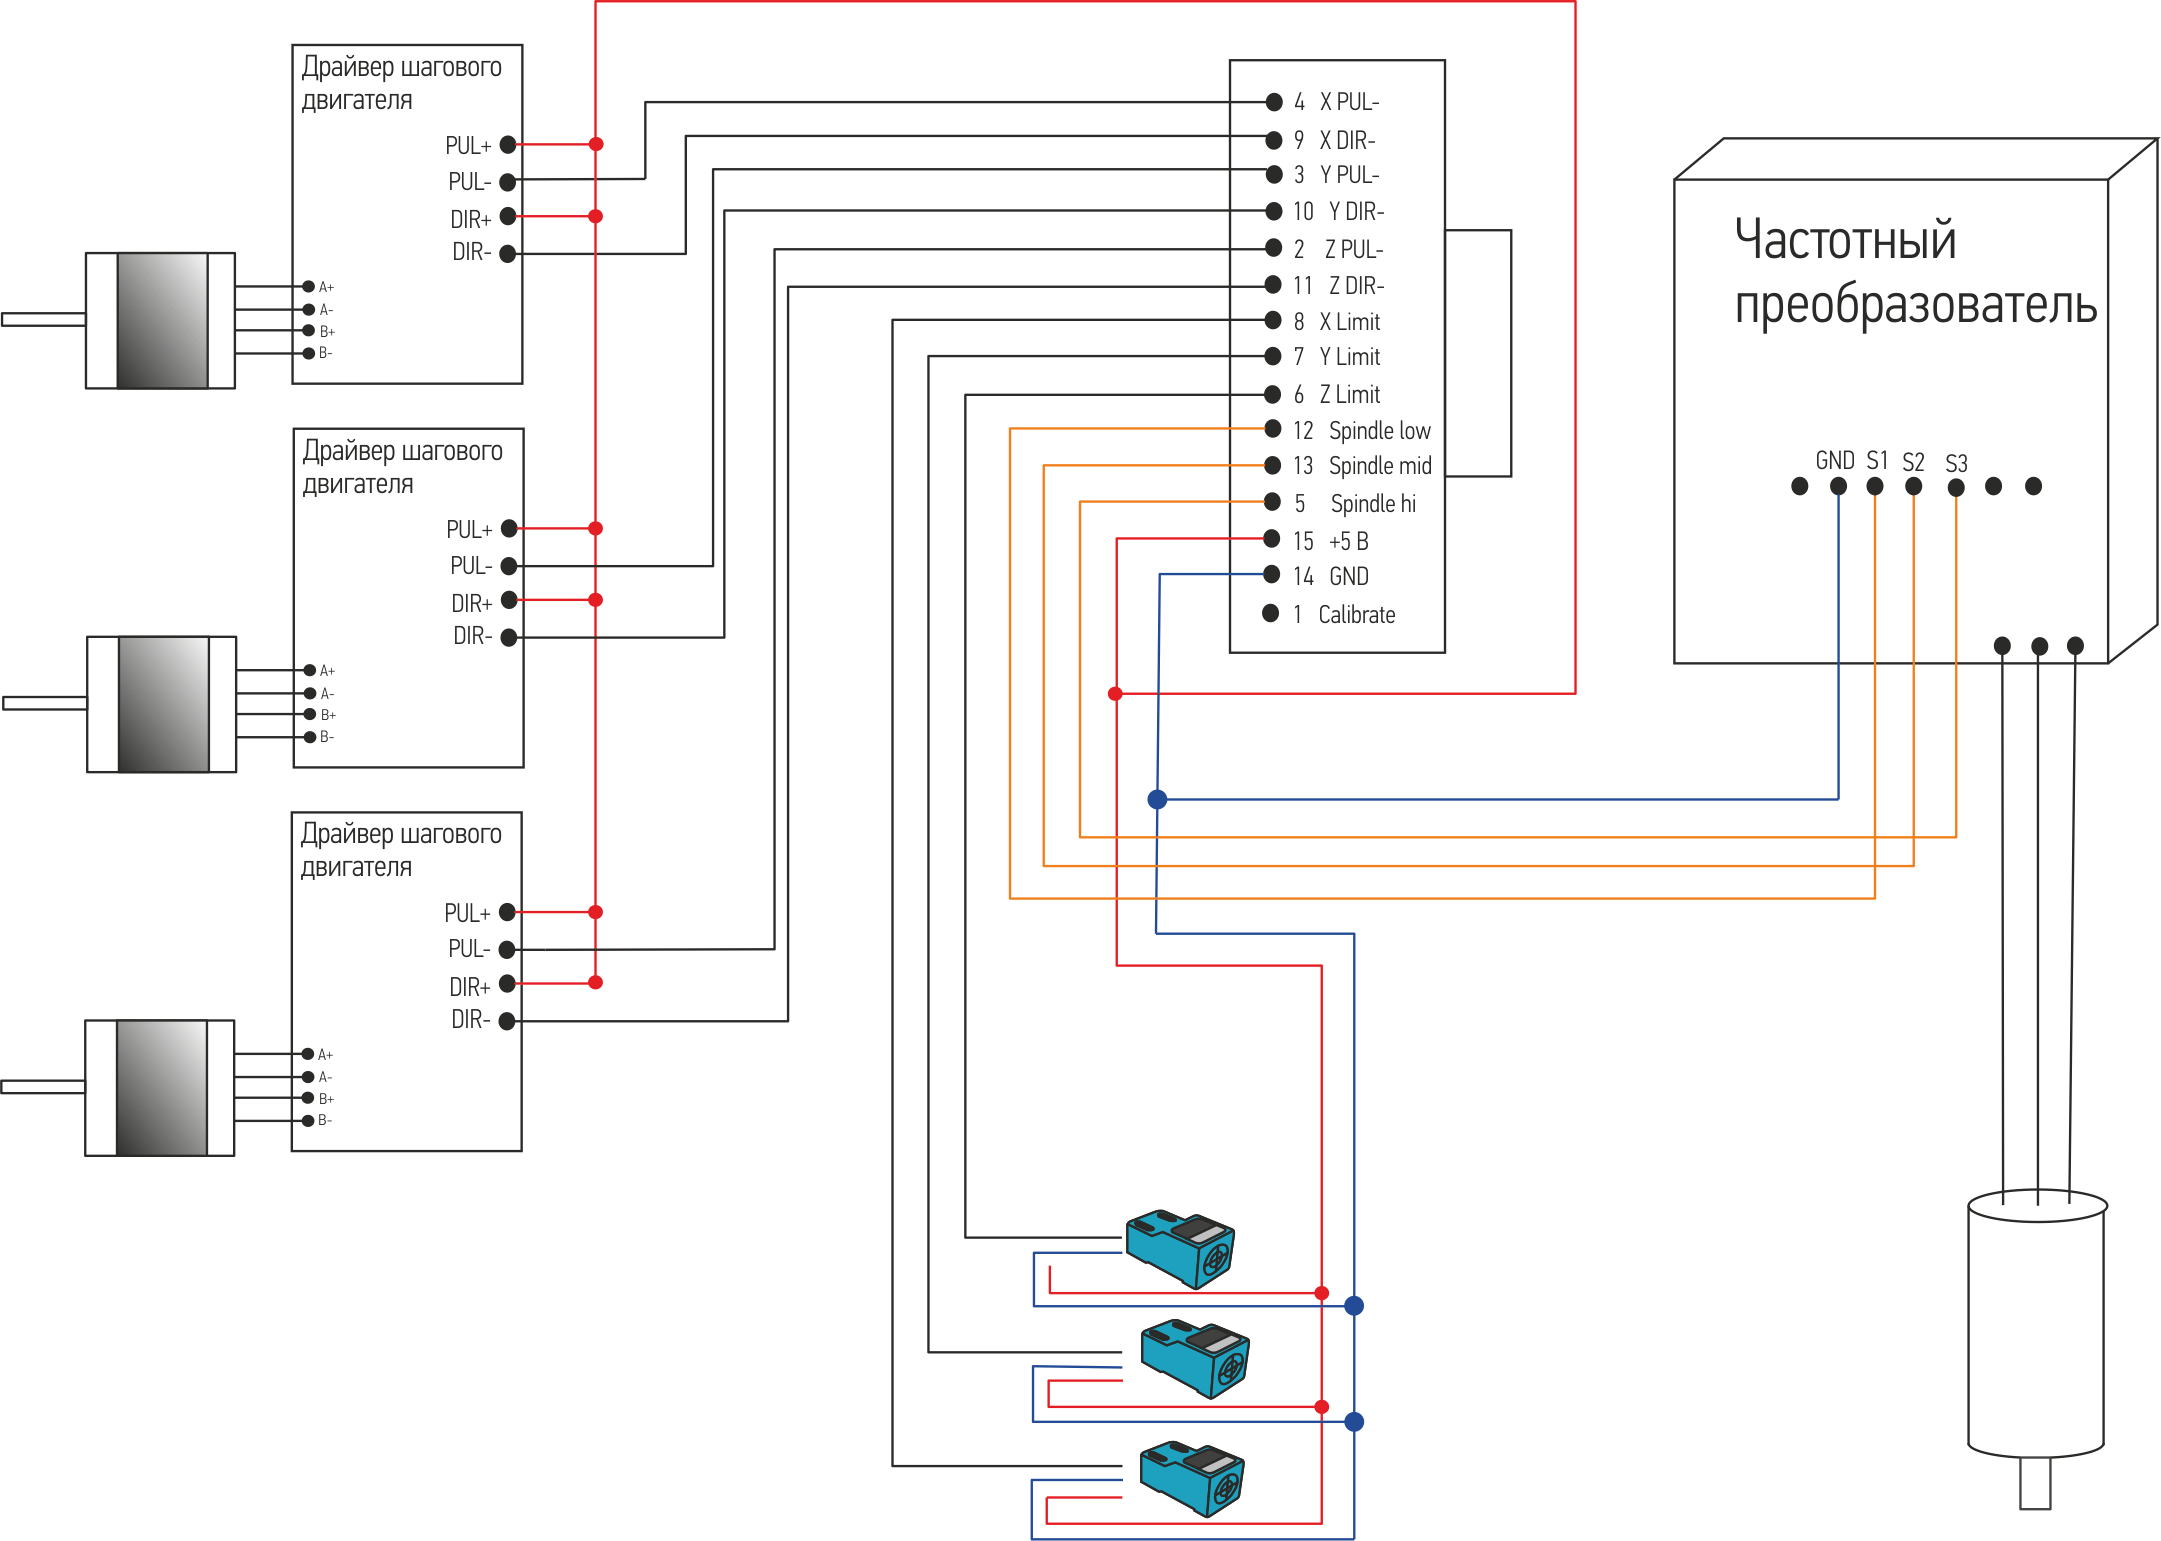 http://darxton.ru/files/img/drawing/controller-and-sets/pcimc3d-commutation.png